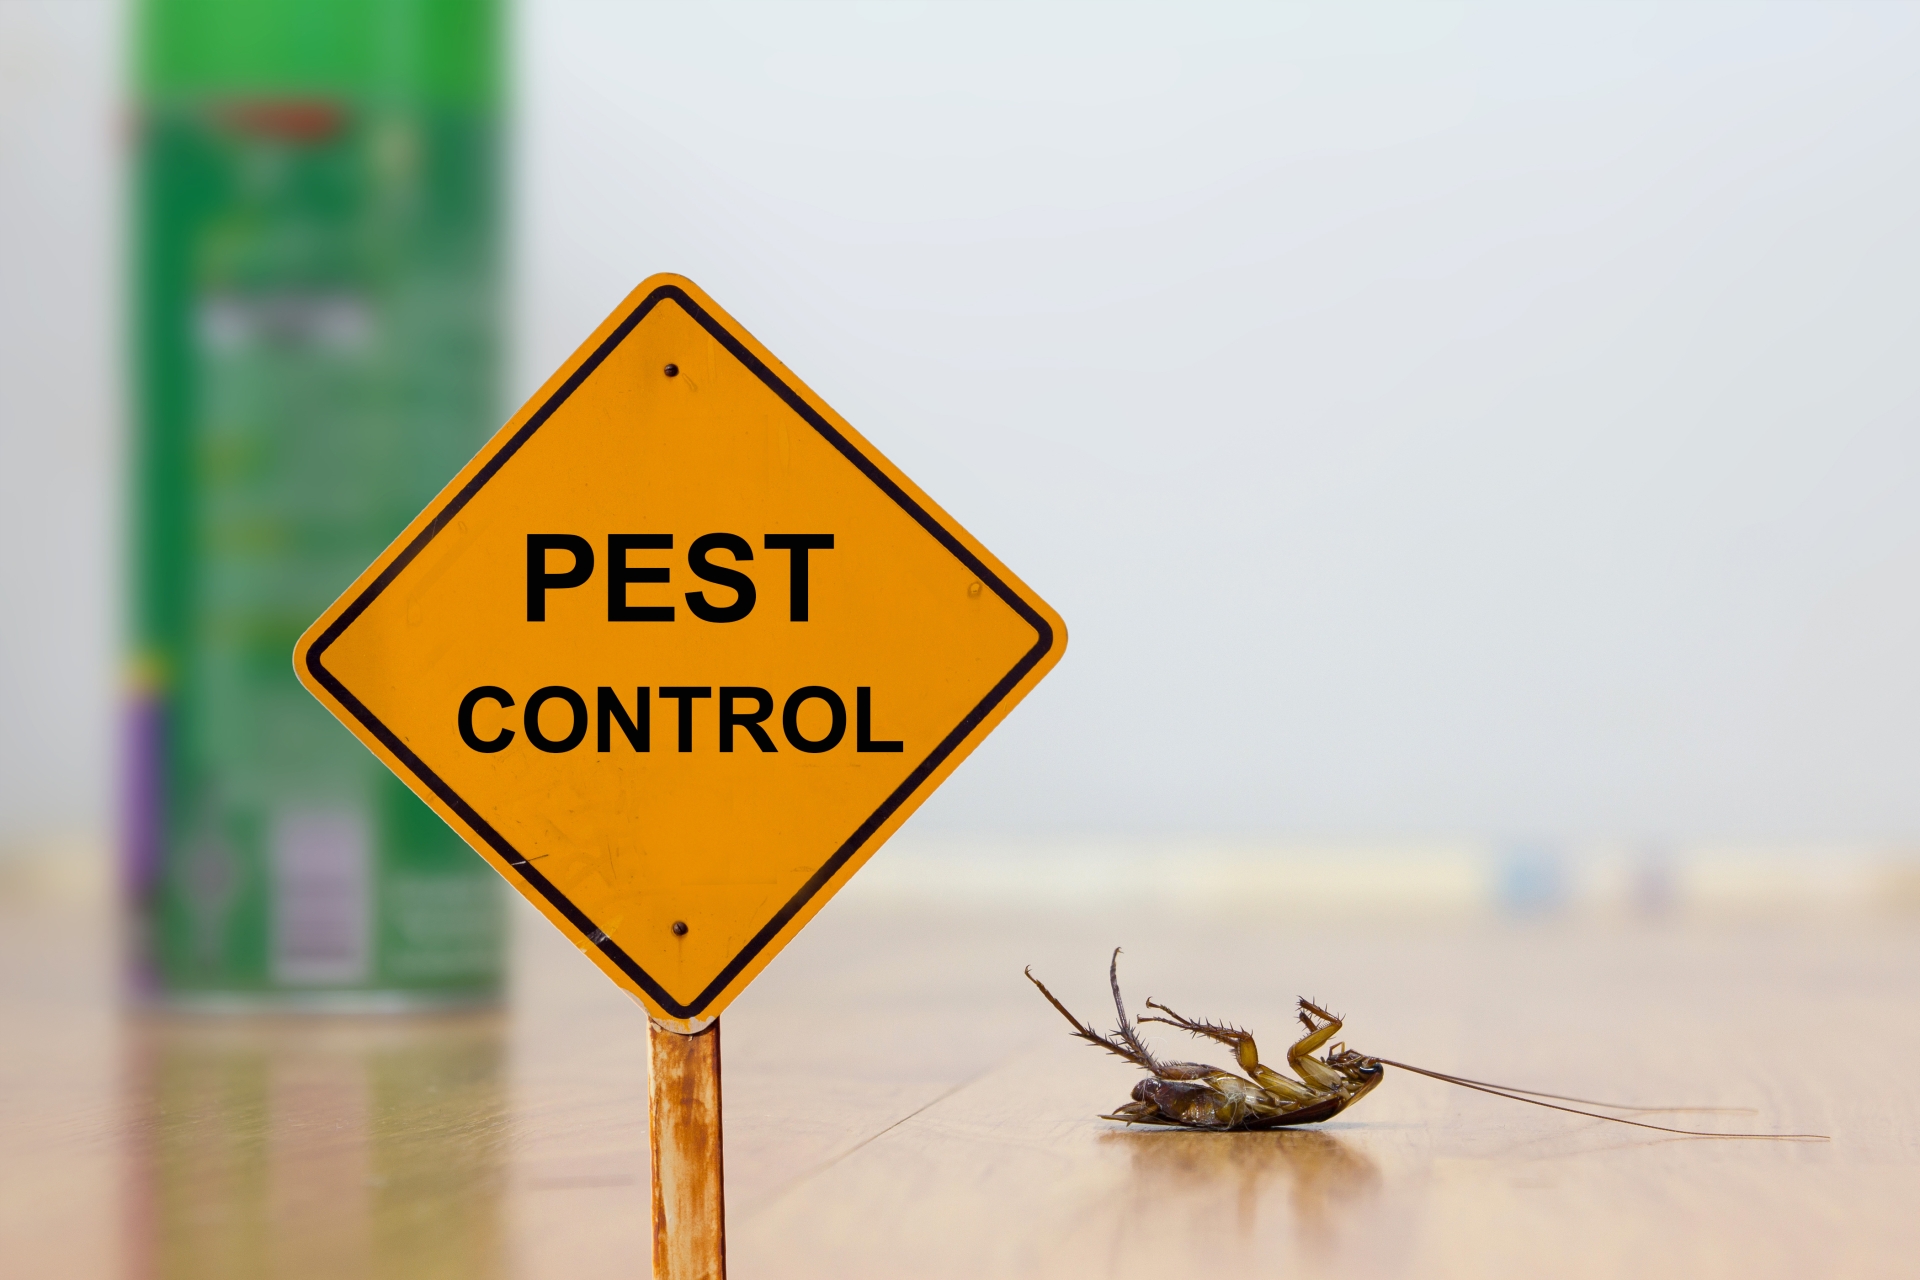 24 Hour Pest Control, Pest Control in Heston, Osterley, TW5. Call Now 020 8166 9746